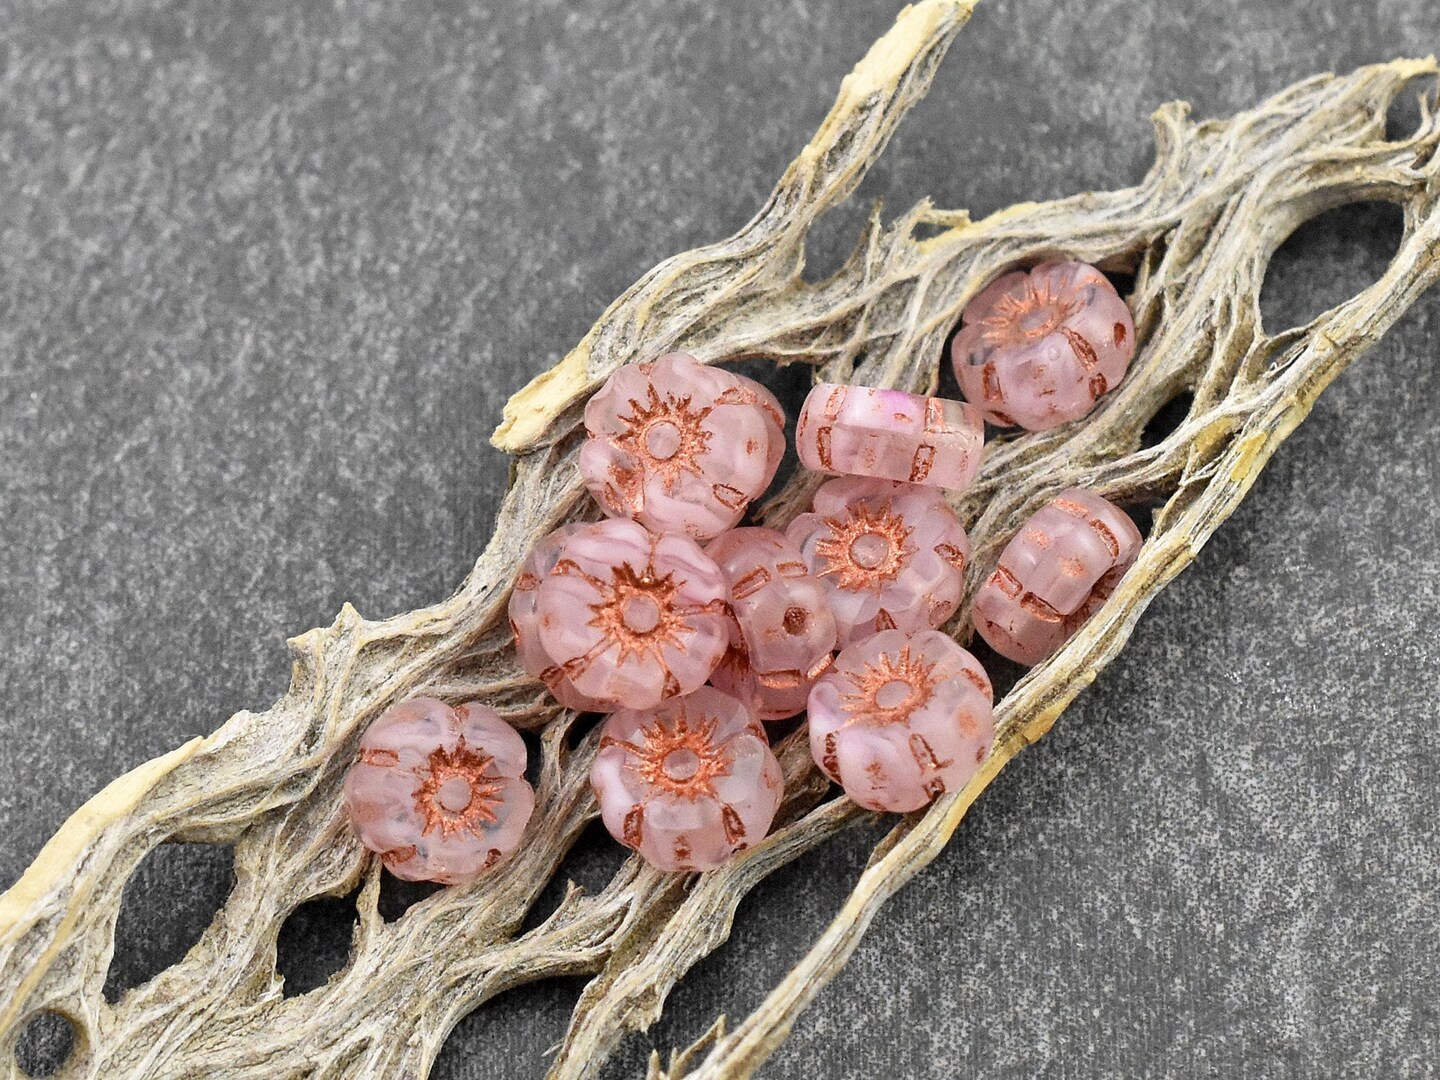 *12* 7mm Copper Washed Milky Pink Hawaiian Flower Beads